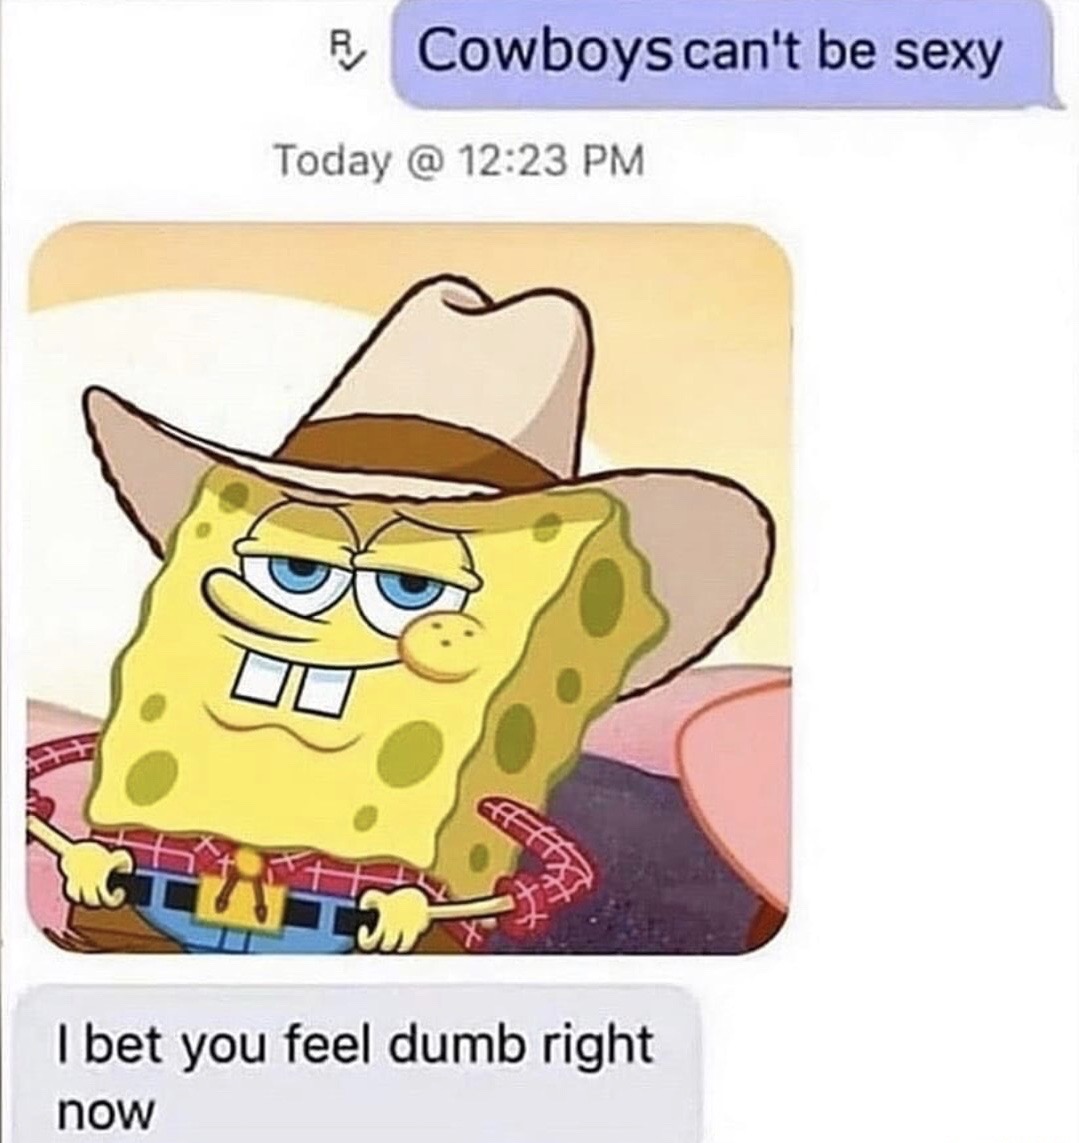 cowboy spongebob - R Cowboys can't be sexy Today @ I bet you feel dumb right now